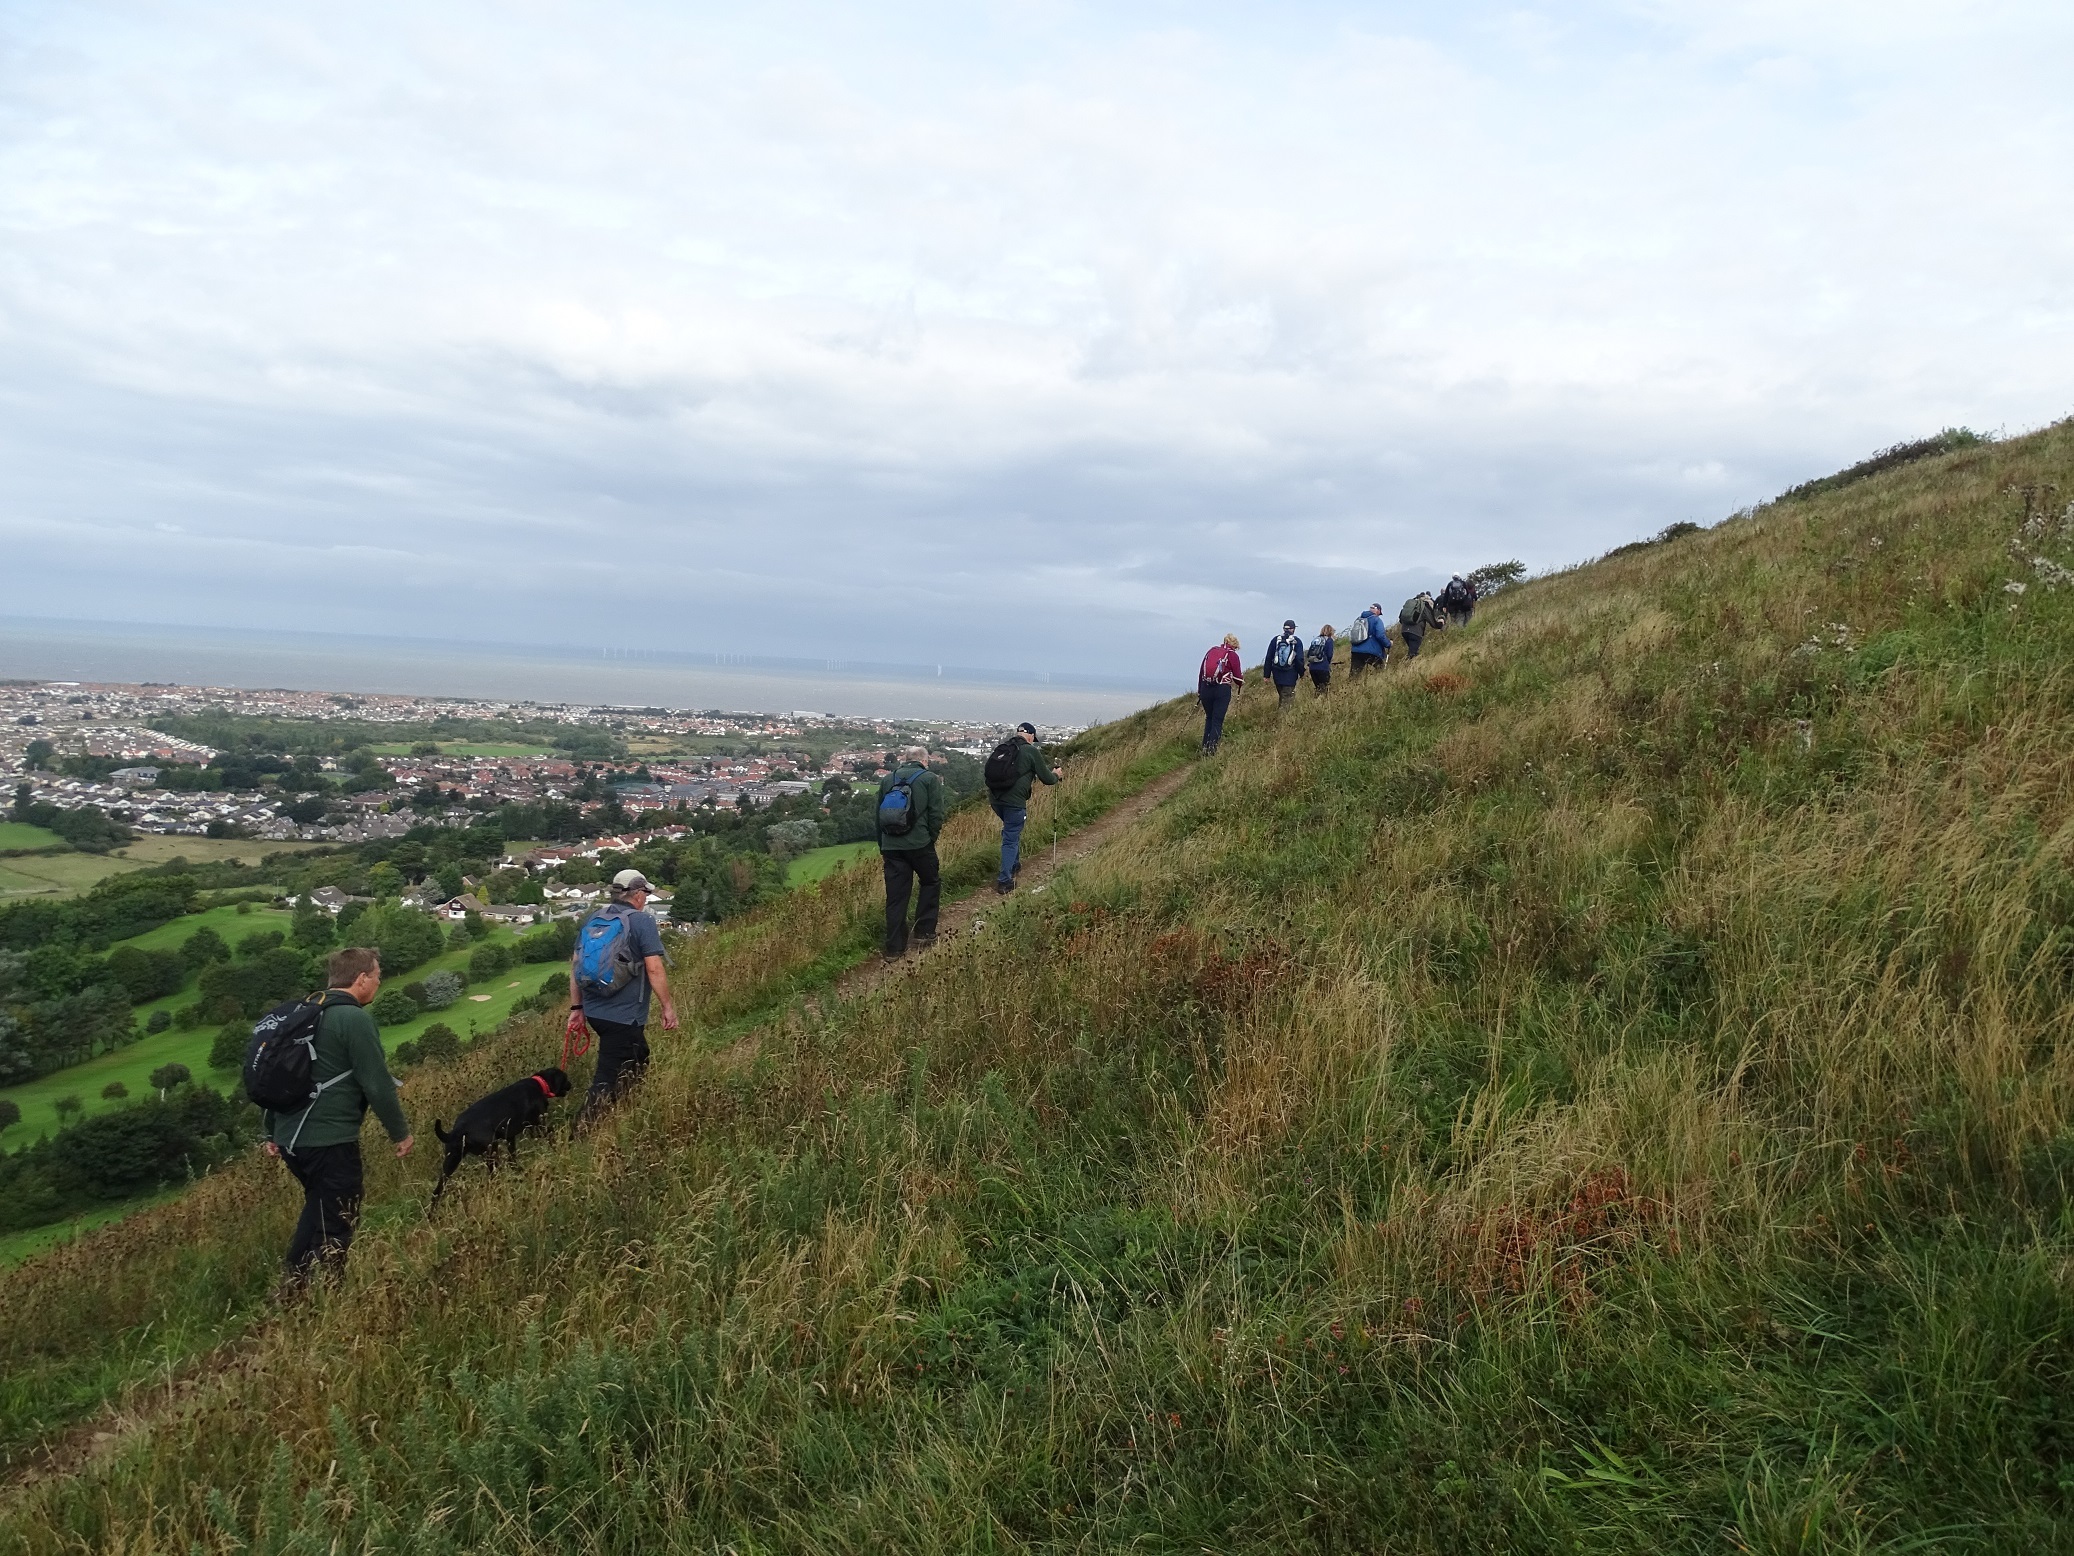 The volunteer group on the Offas Dyke Path above Prestatyn.